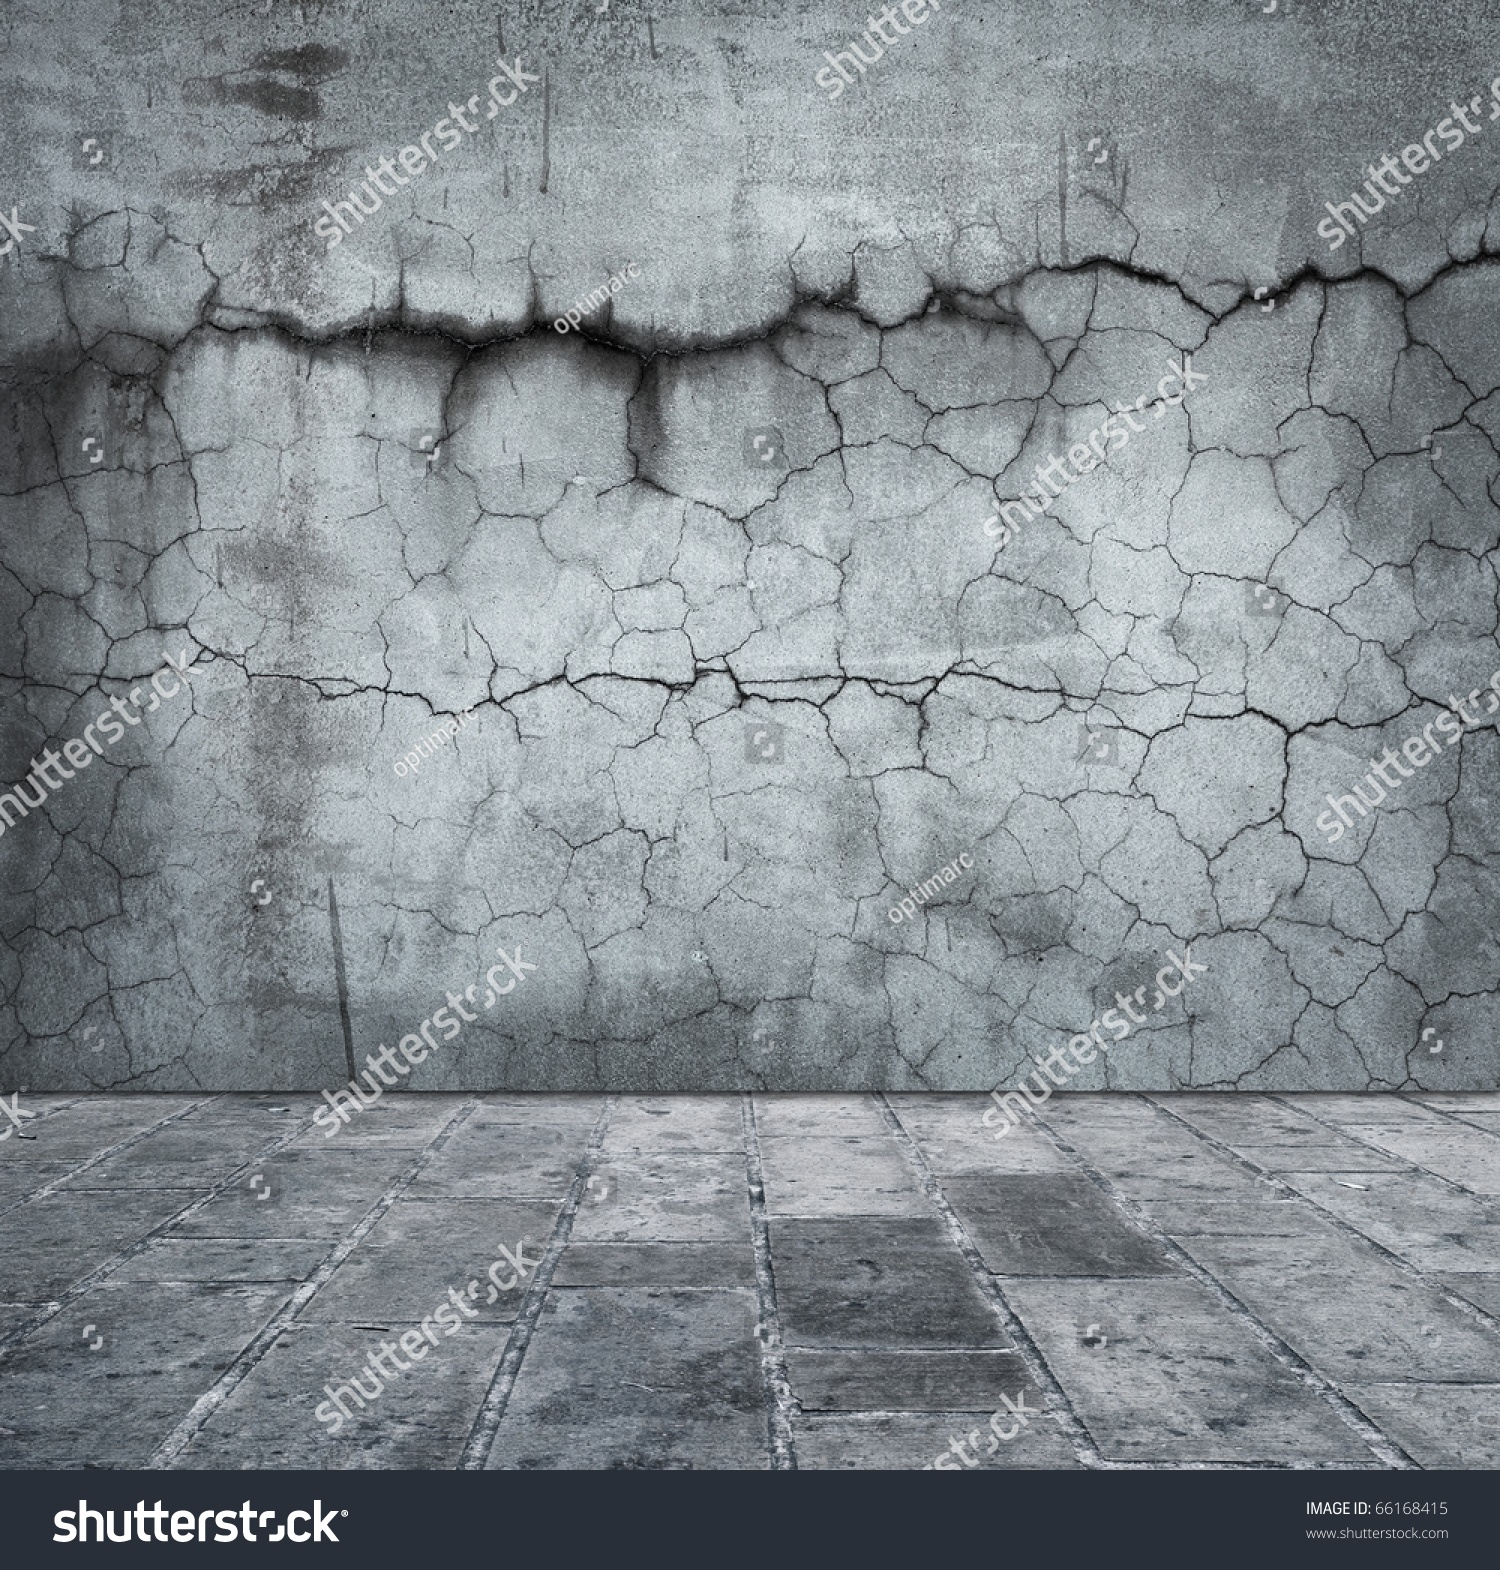 Grungy Distressed Stone Wall Floor Large Stock Photo & Image ...